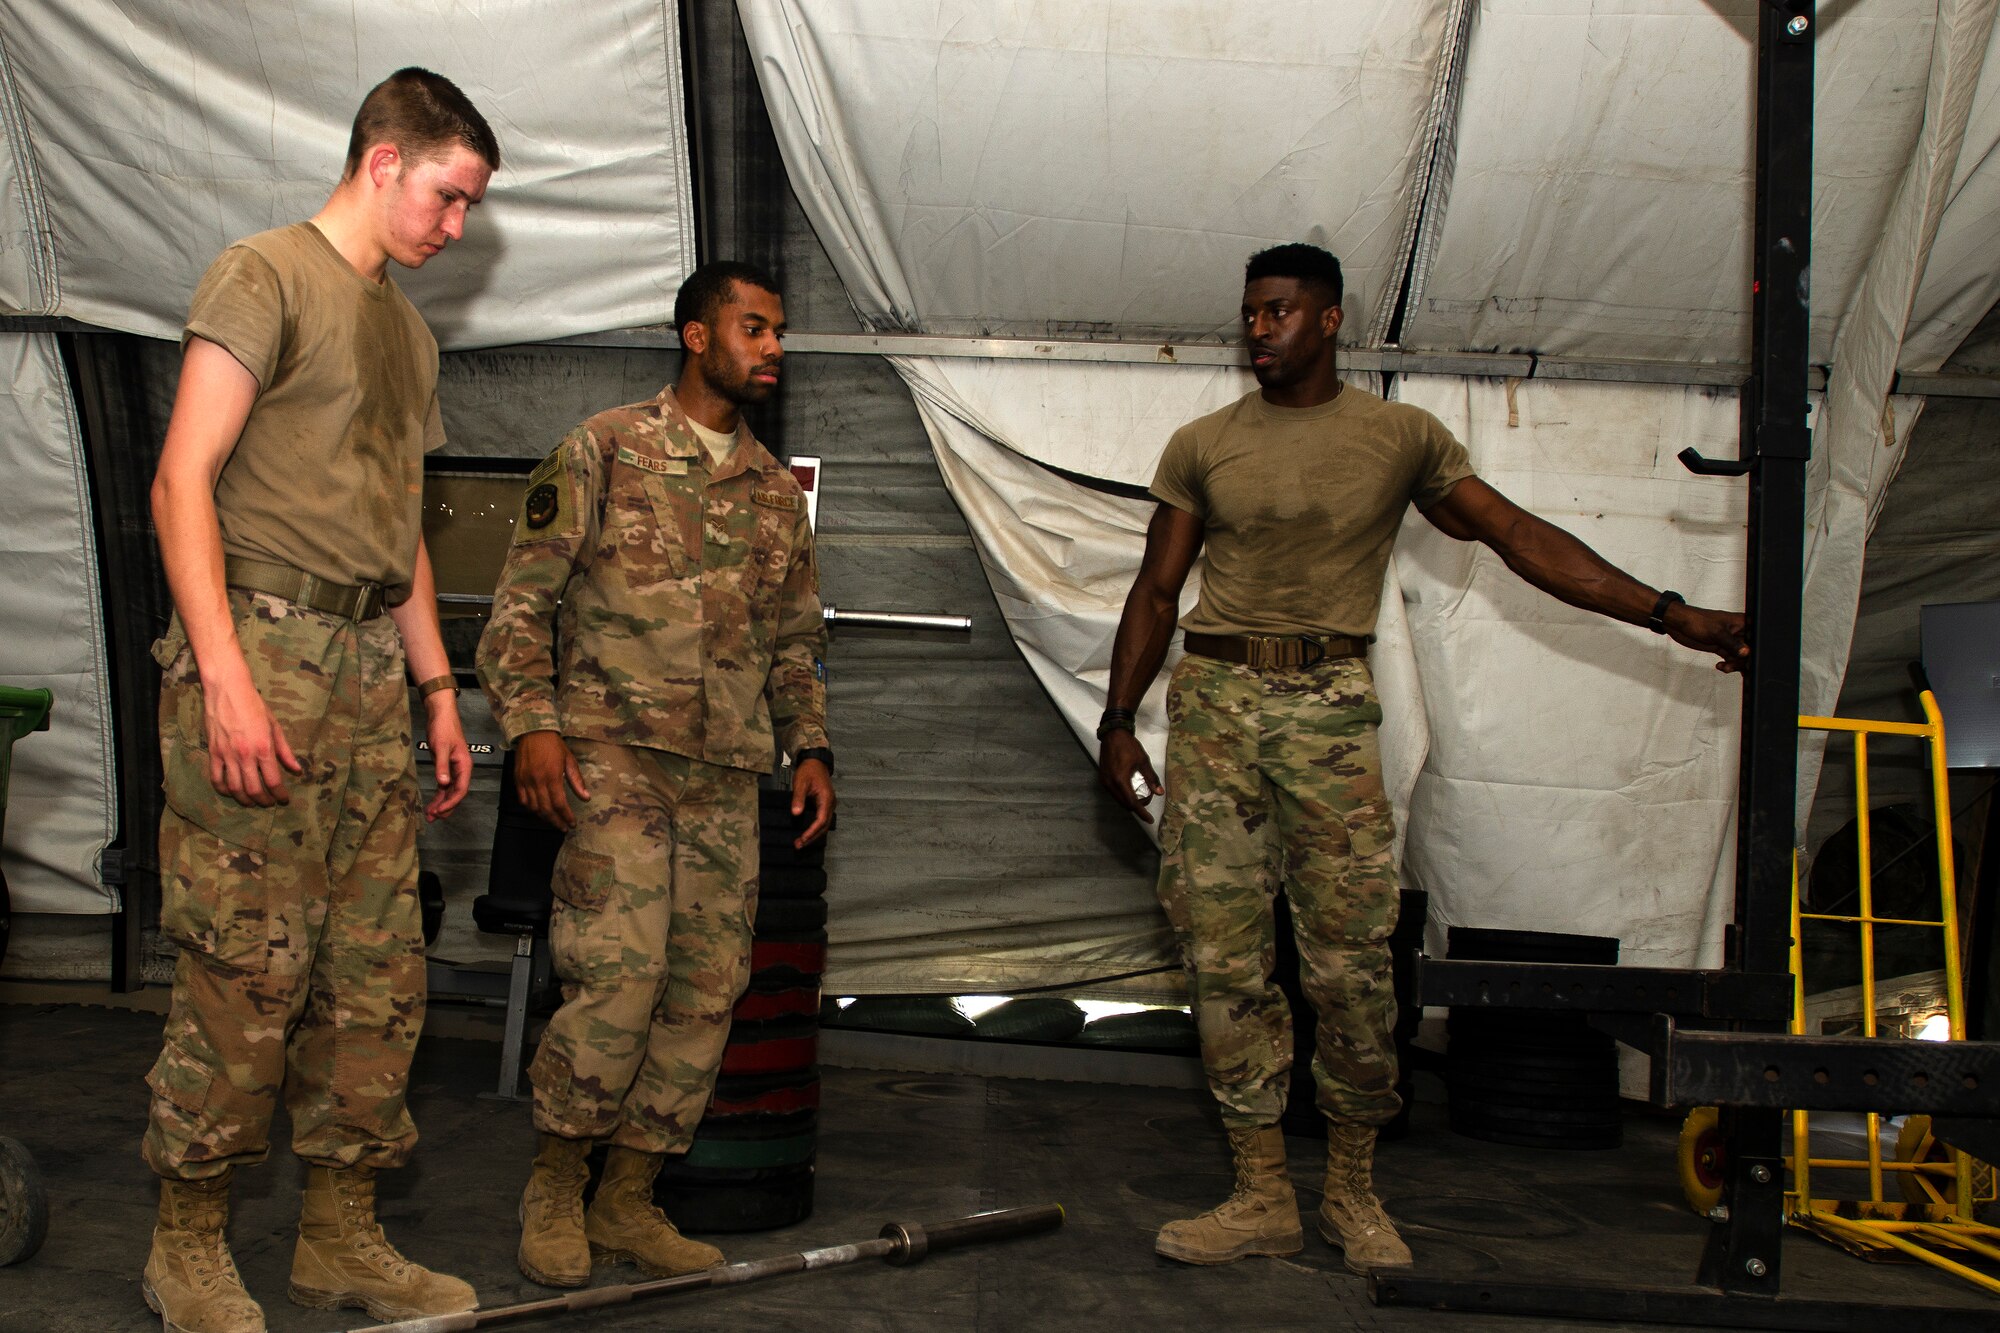 Airmen with the 386th Expeditionary Force Support Squadron set up the new temporary fitness tent on Ali Al Salem Air Base, Kuwait, July 24, 2019. The new fitness tent is slated to open Aug.1, 2019, replacing the original facility which is scheduled for demolition to make room for future base improvement projects. This facility offers Airmen a second fitness location and expected to be in use until mid-November when the more permanent structure is completed. (U.S. Air Force photo by Capt. Stephen Hudson)